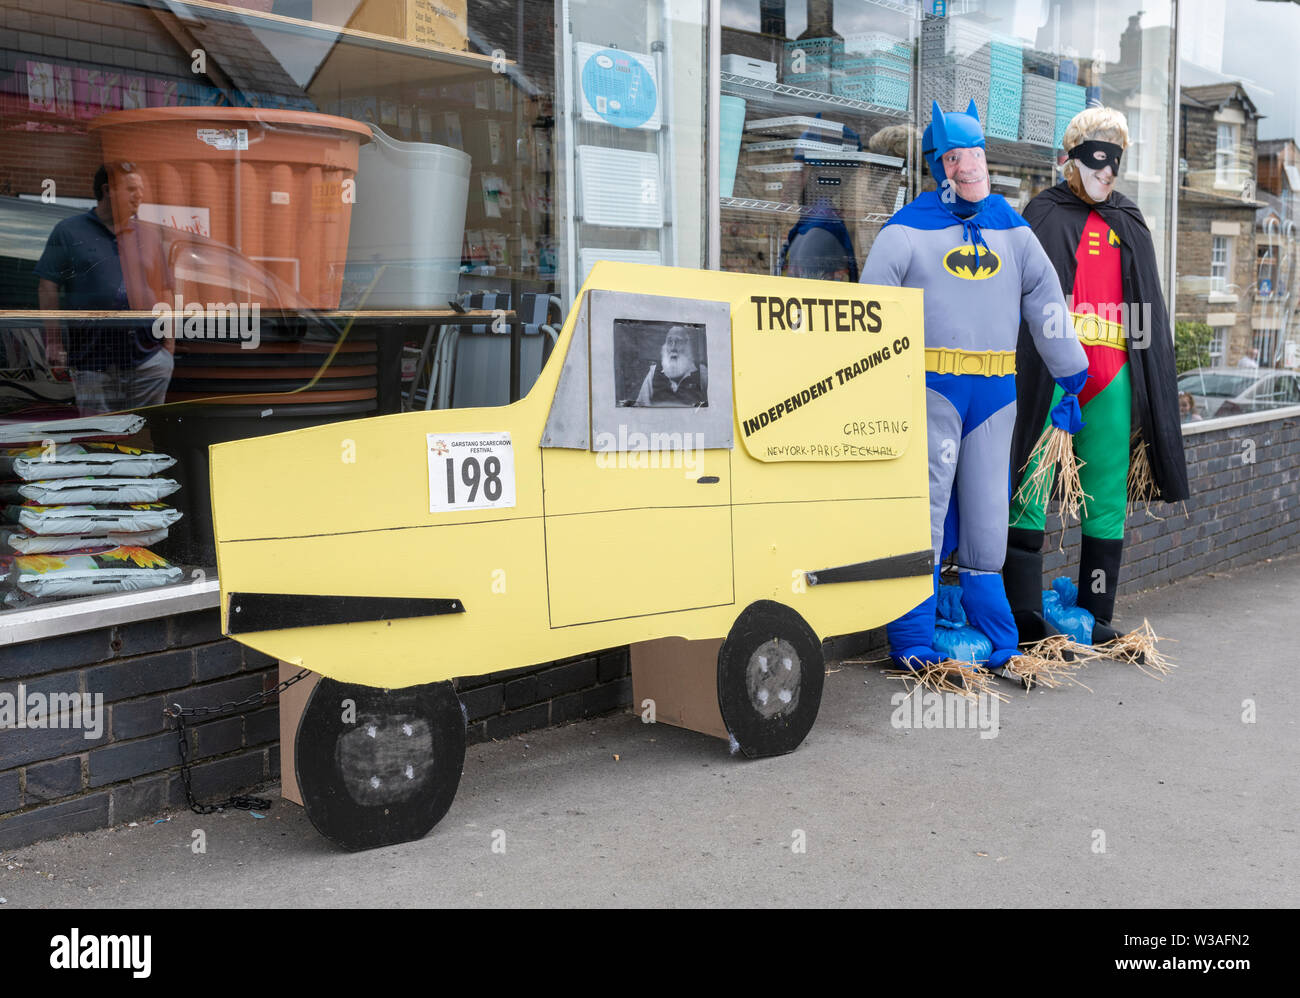 An exhibit at the Garstang Scarecrow Festival. Del and Rodney from Only Fools and Horses, dressed as Batman and Robin with their yellow three wheeler Stock Photo